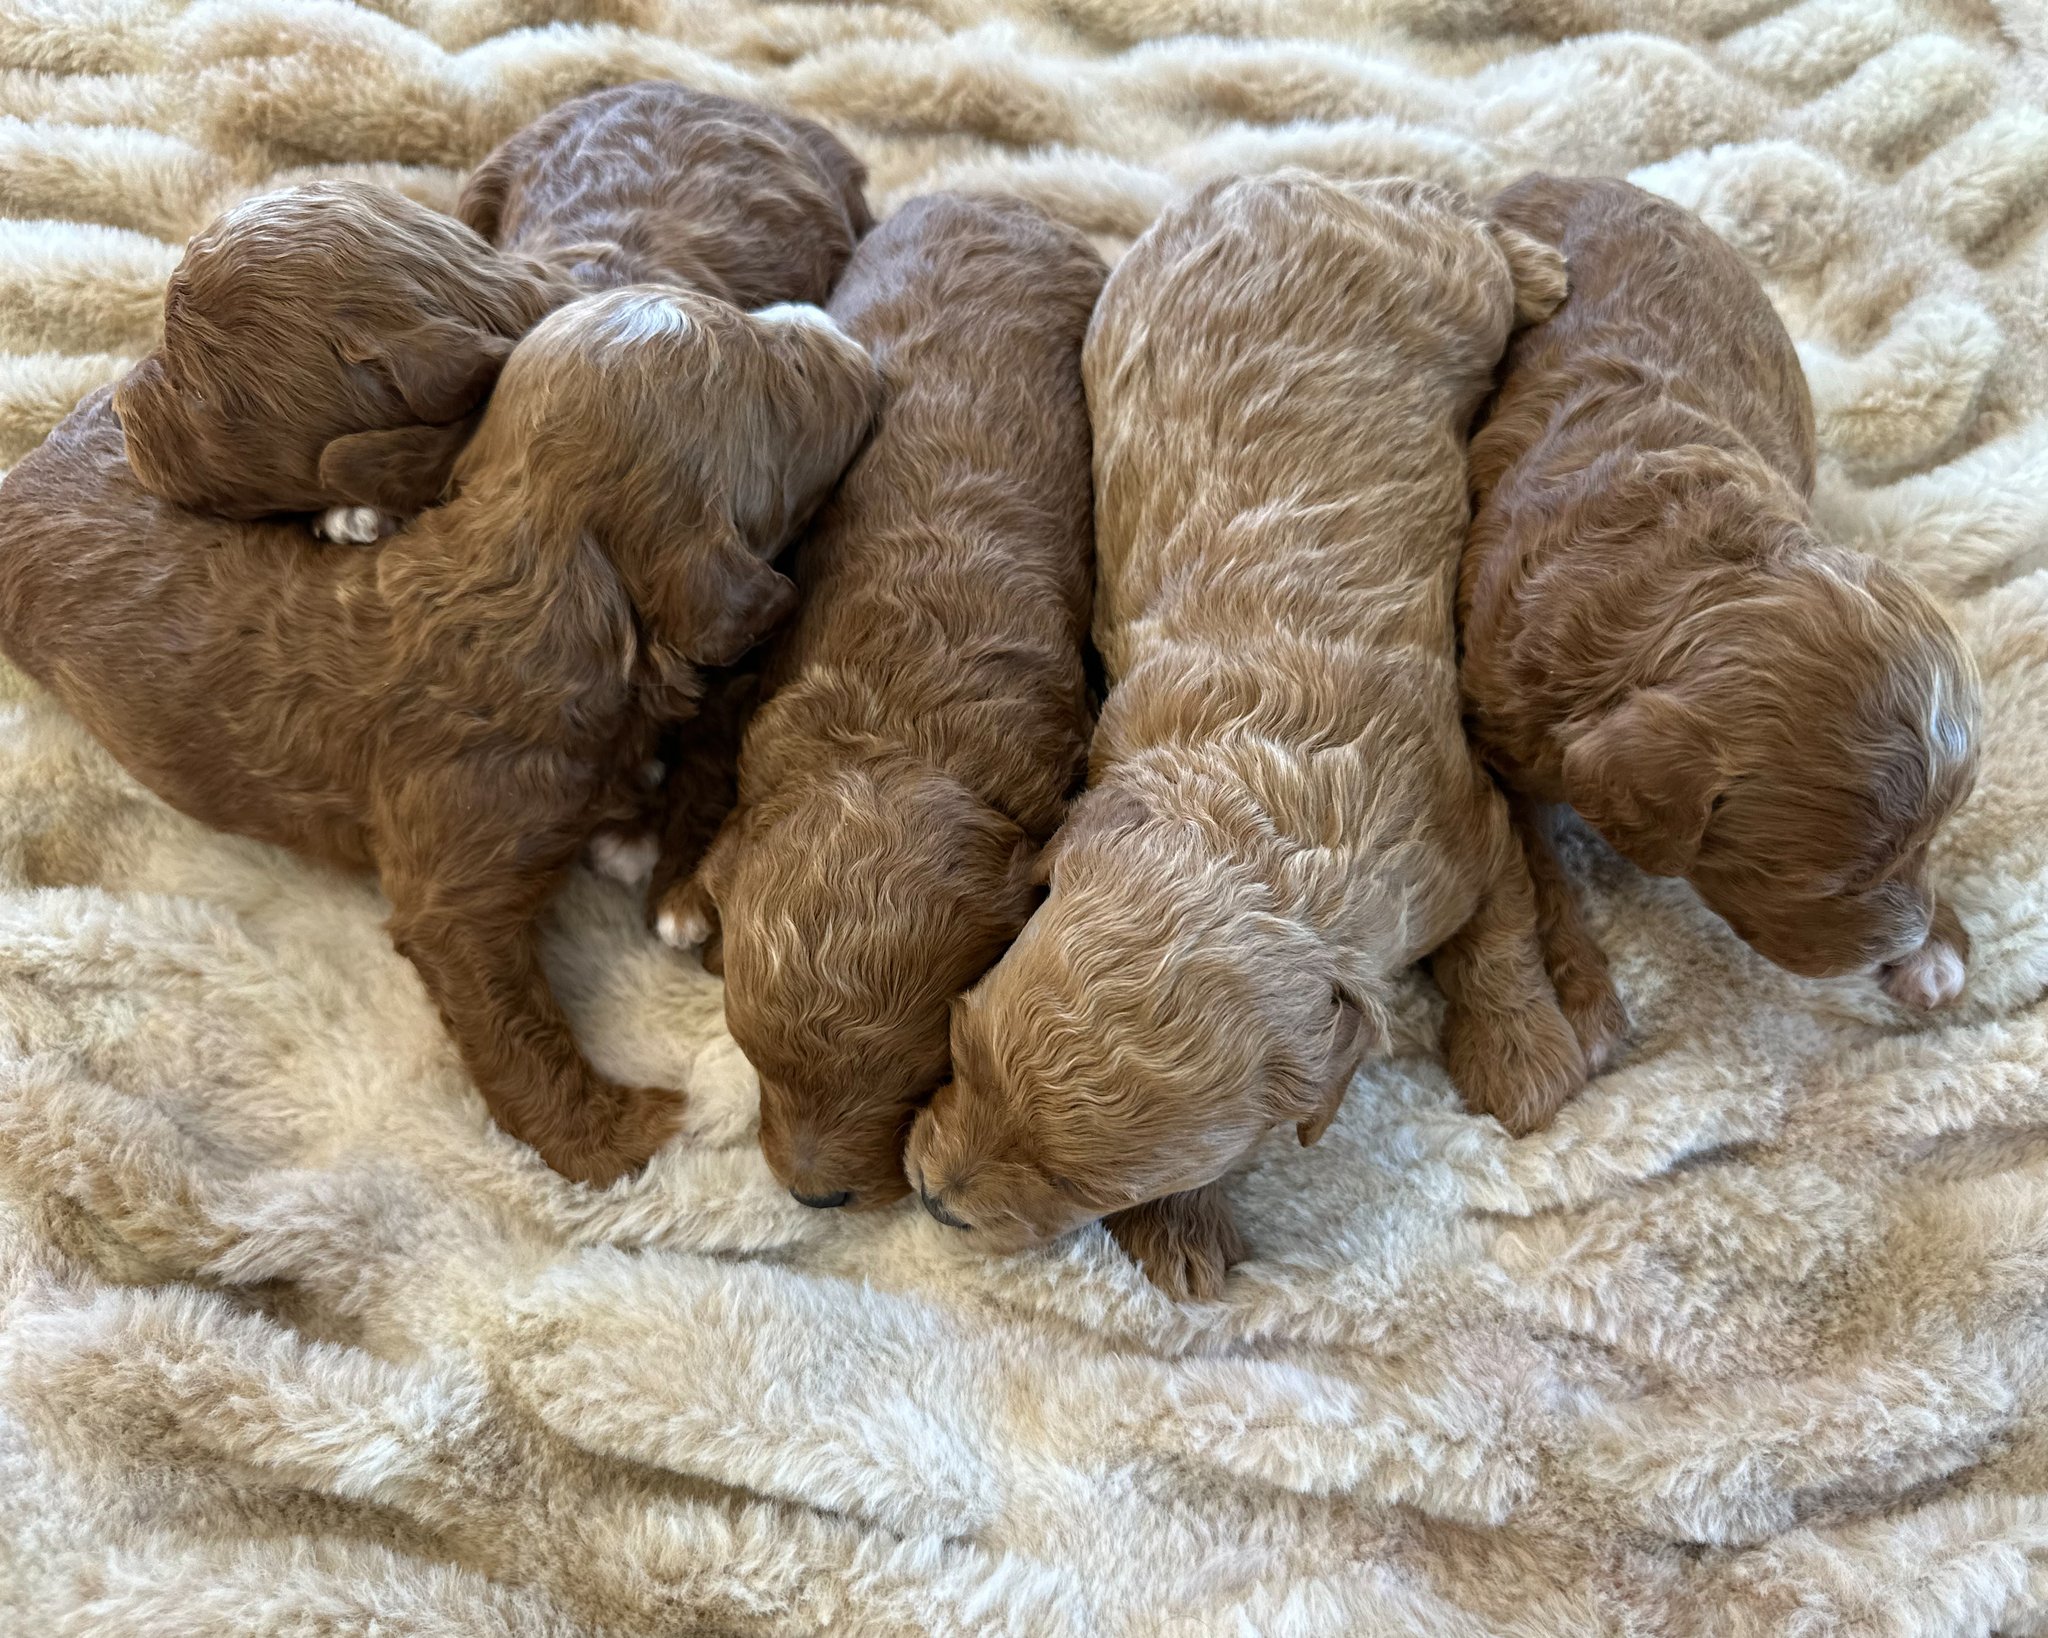 A litter of Petite Poodles raised in Iowa by Poodles 2 Doodles